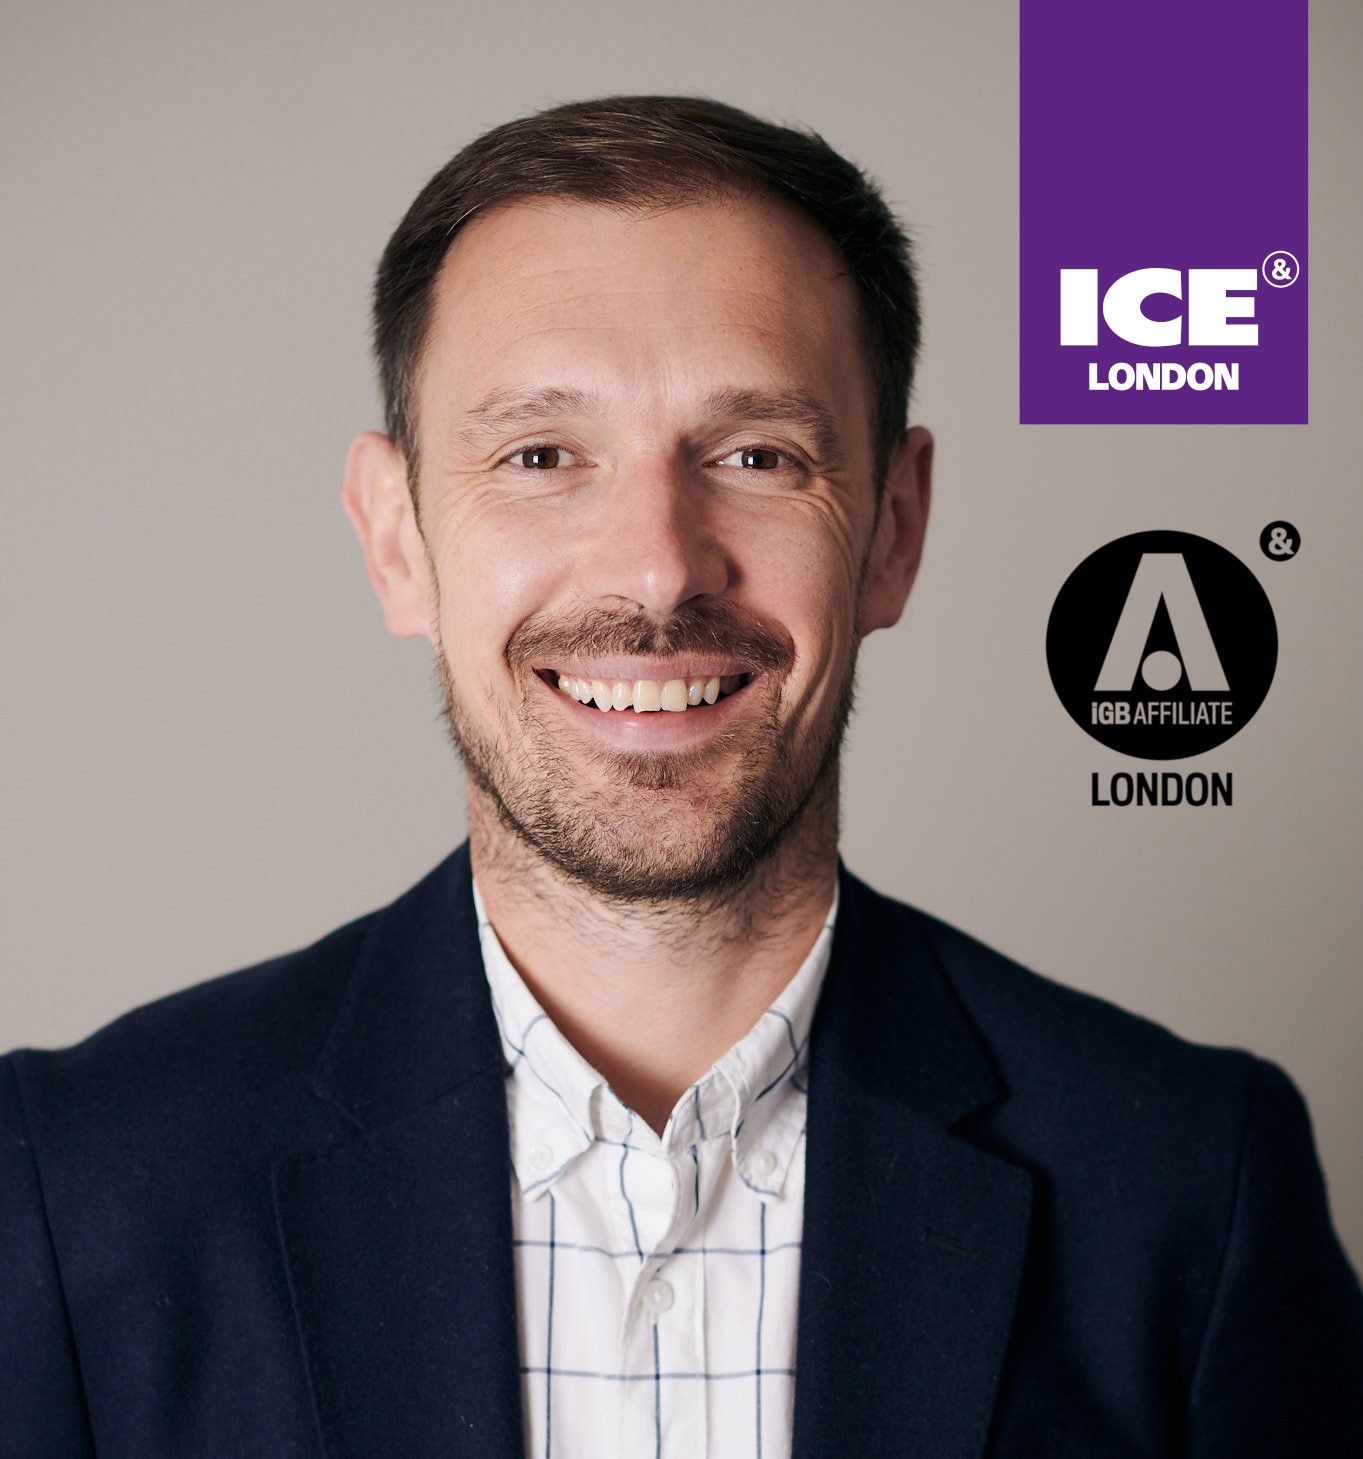 ICE London conducts eight phase focus group programme with first time attendees